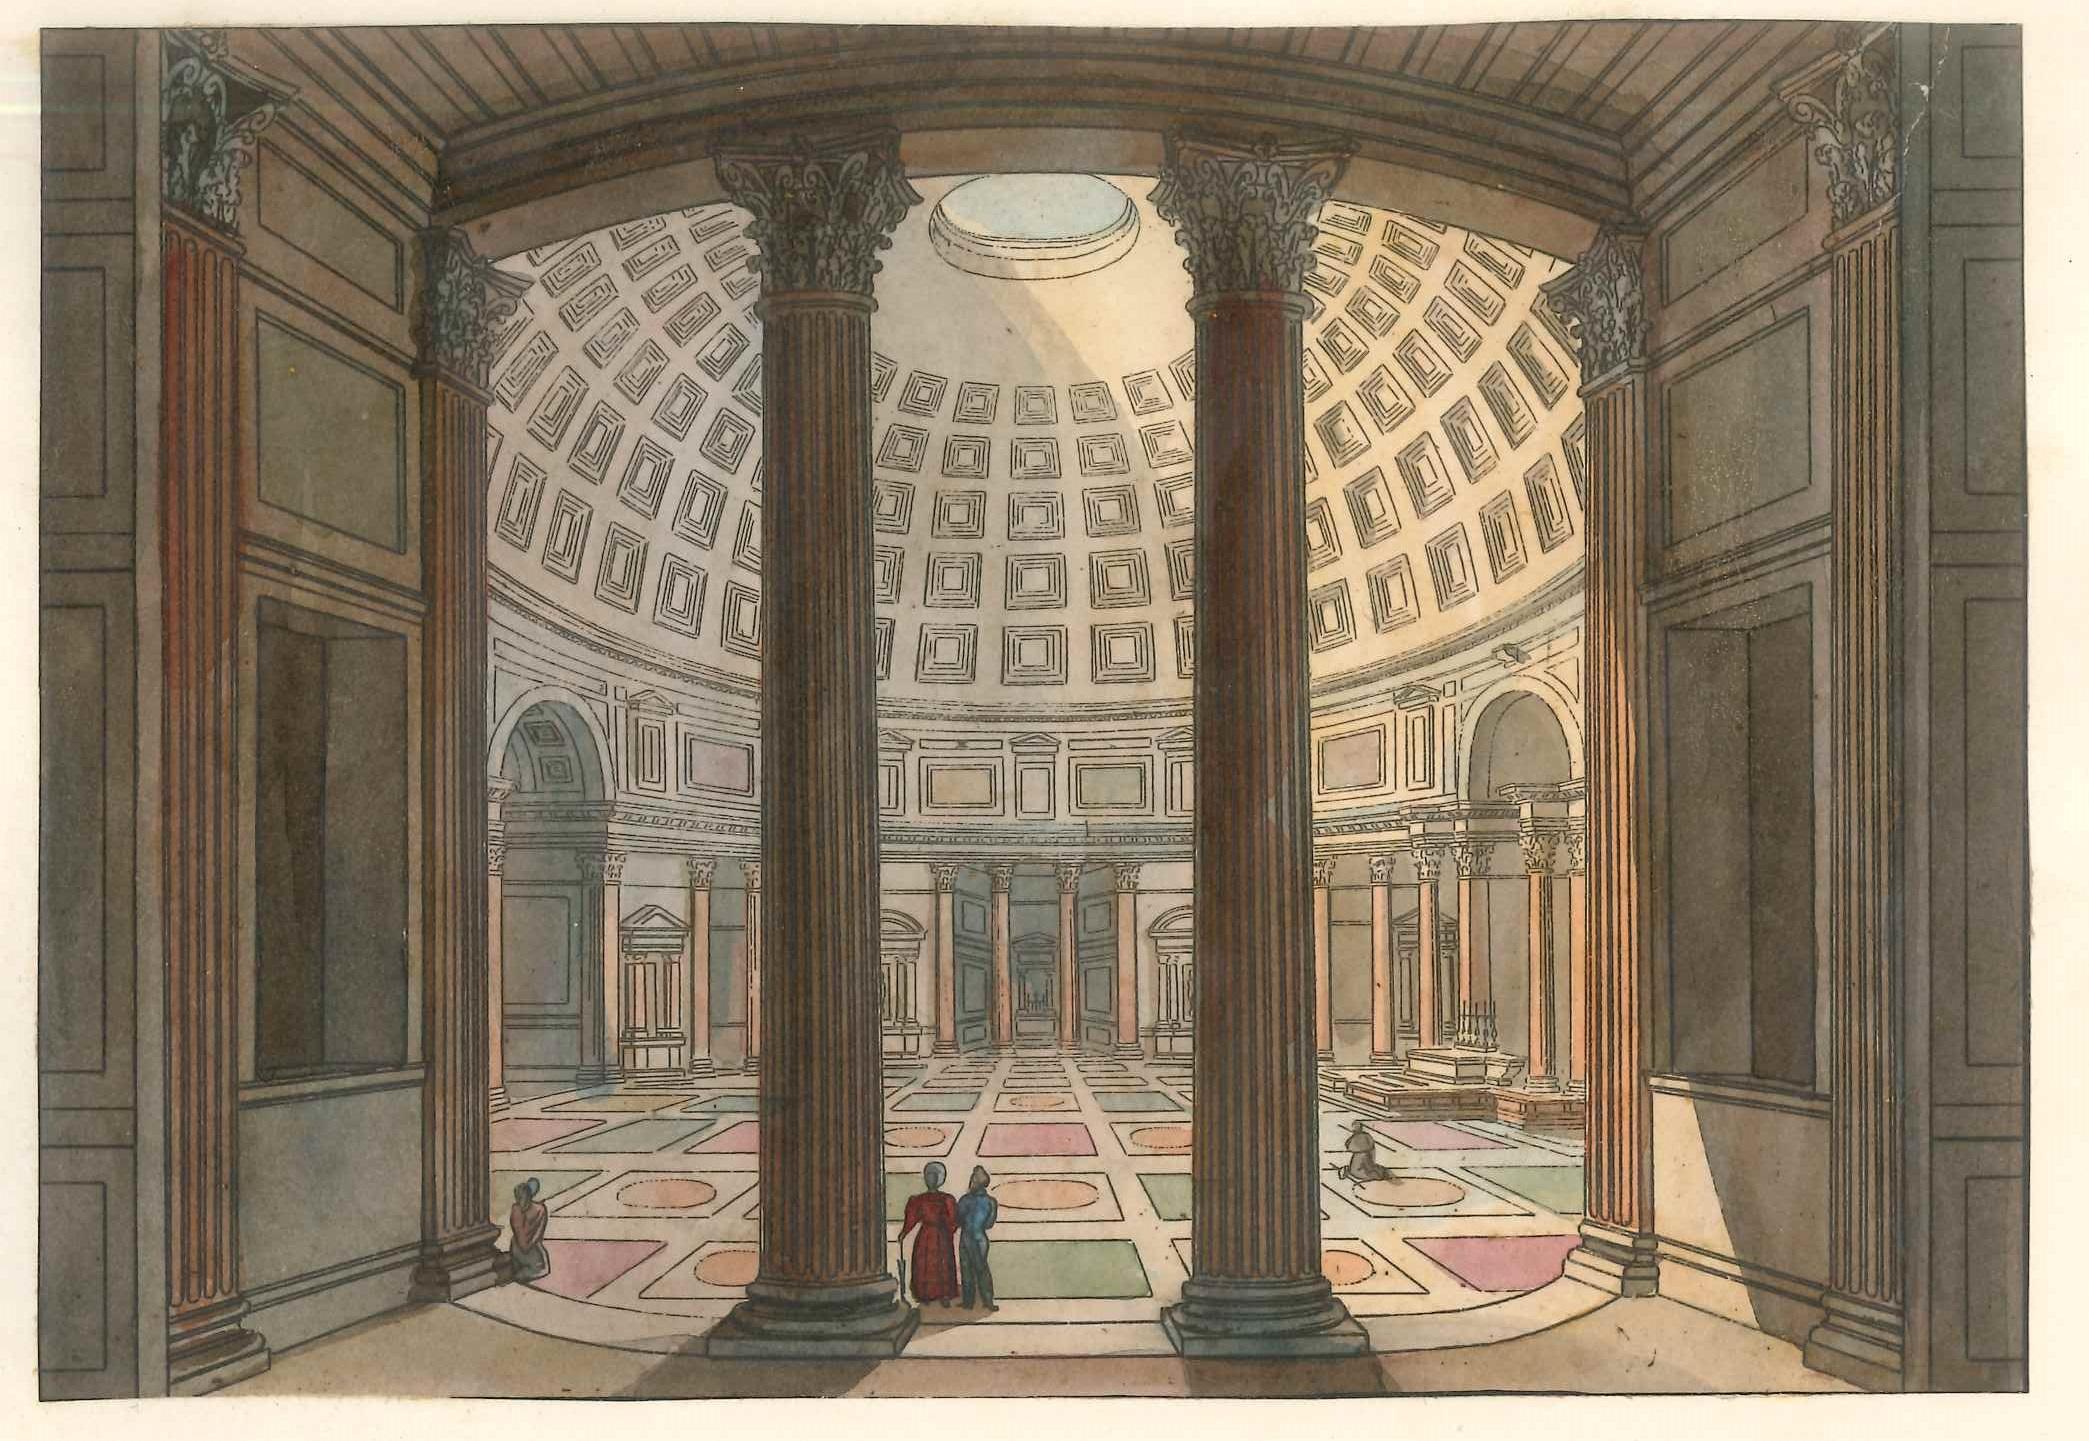 The Pantheon - Original Lithographs and Watercolors - Mid 19th Century - Print by Unknown